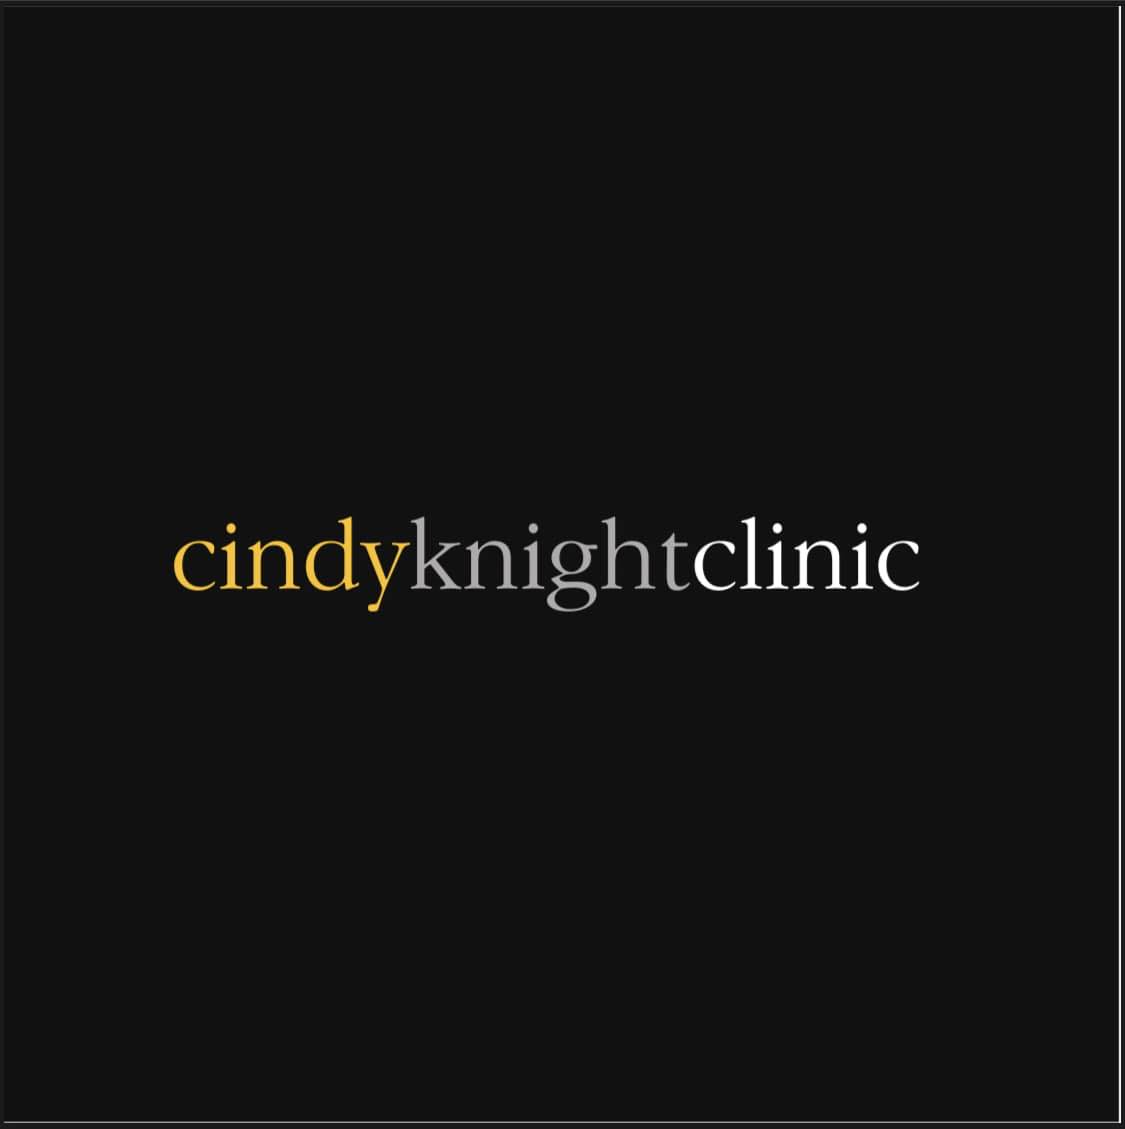 The Cindy Knight Clinic